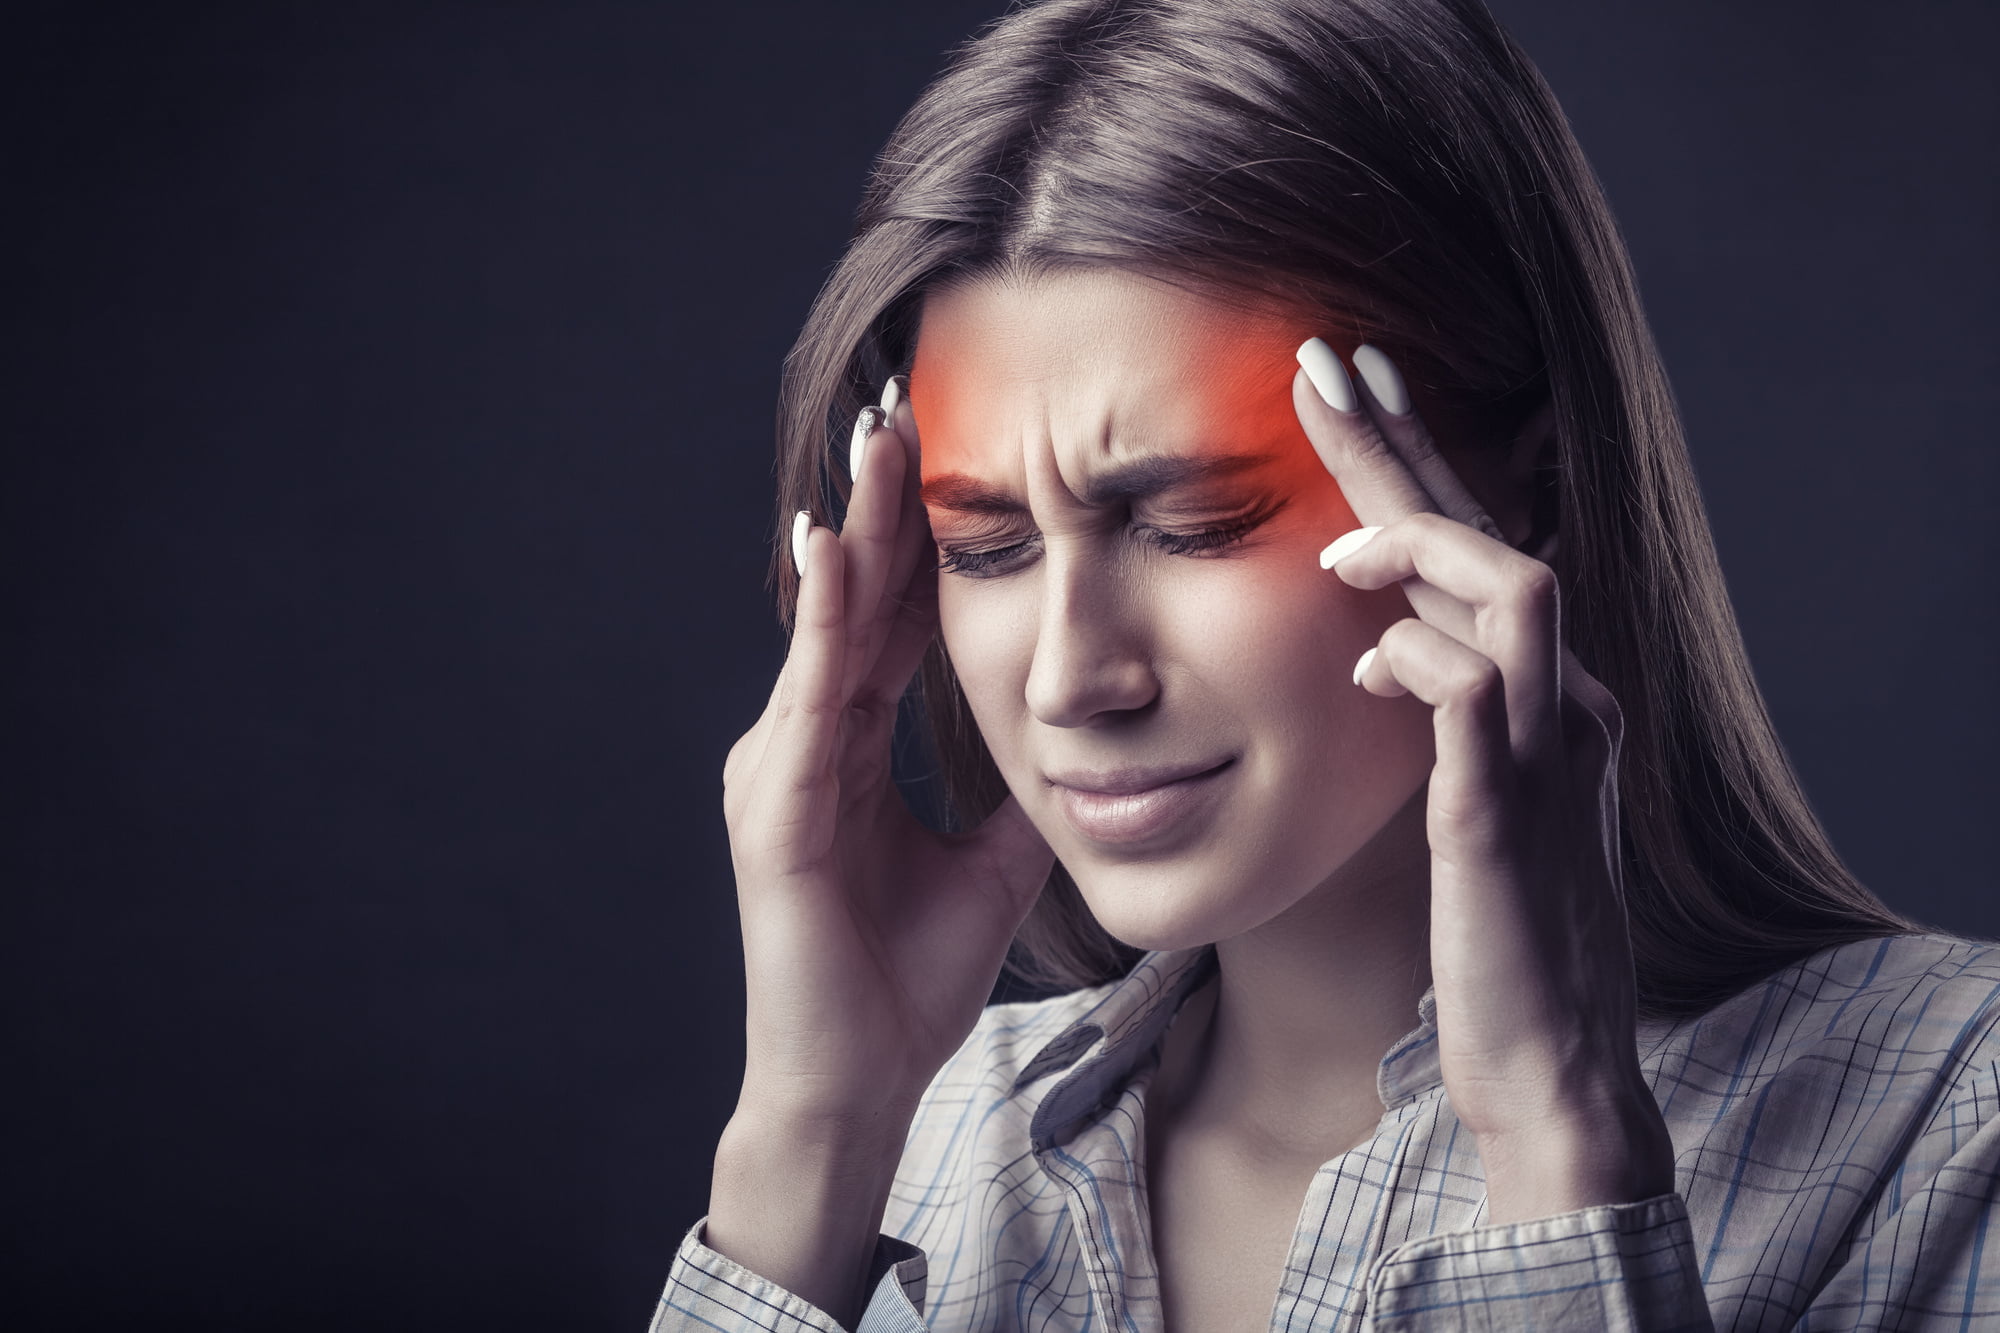 There are several types of migraines that people experience. This guide covers what you need to understand about migraines.